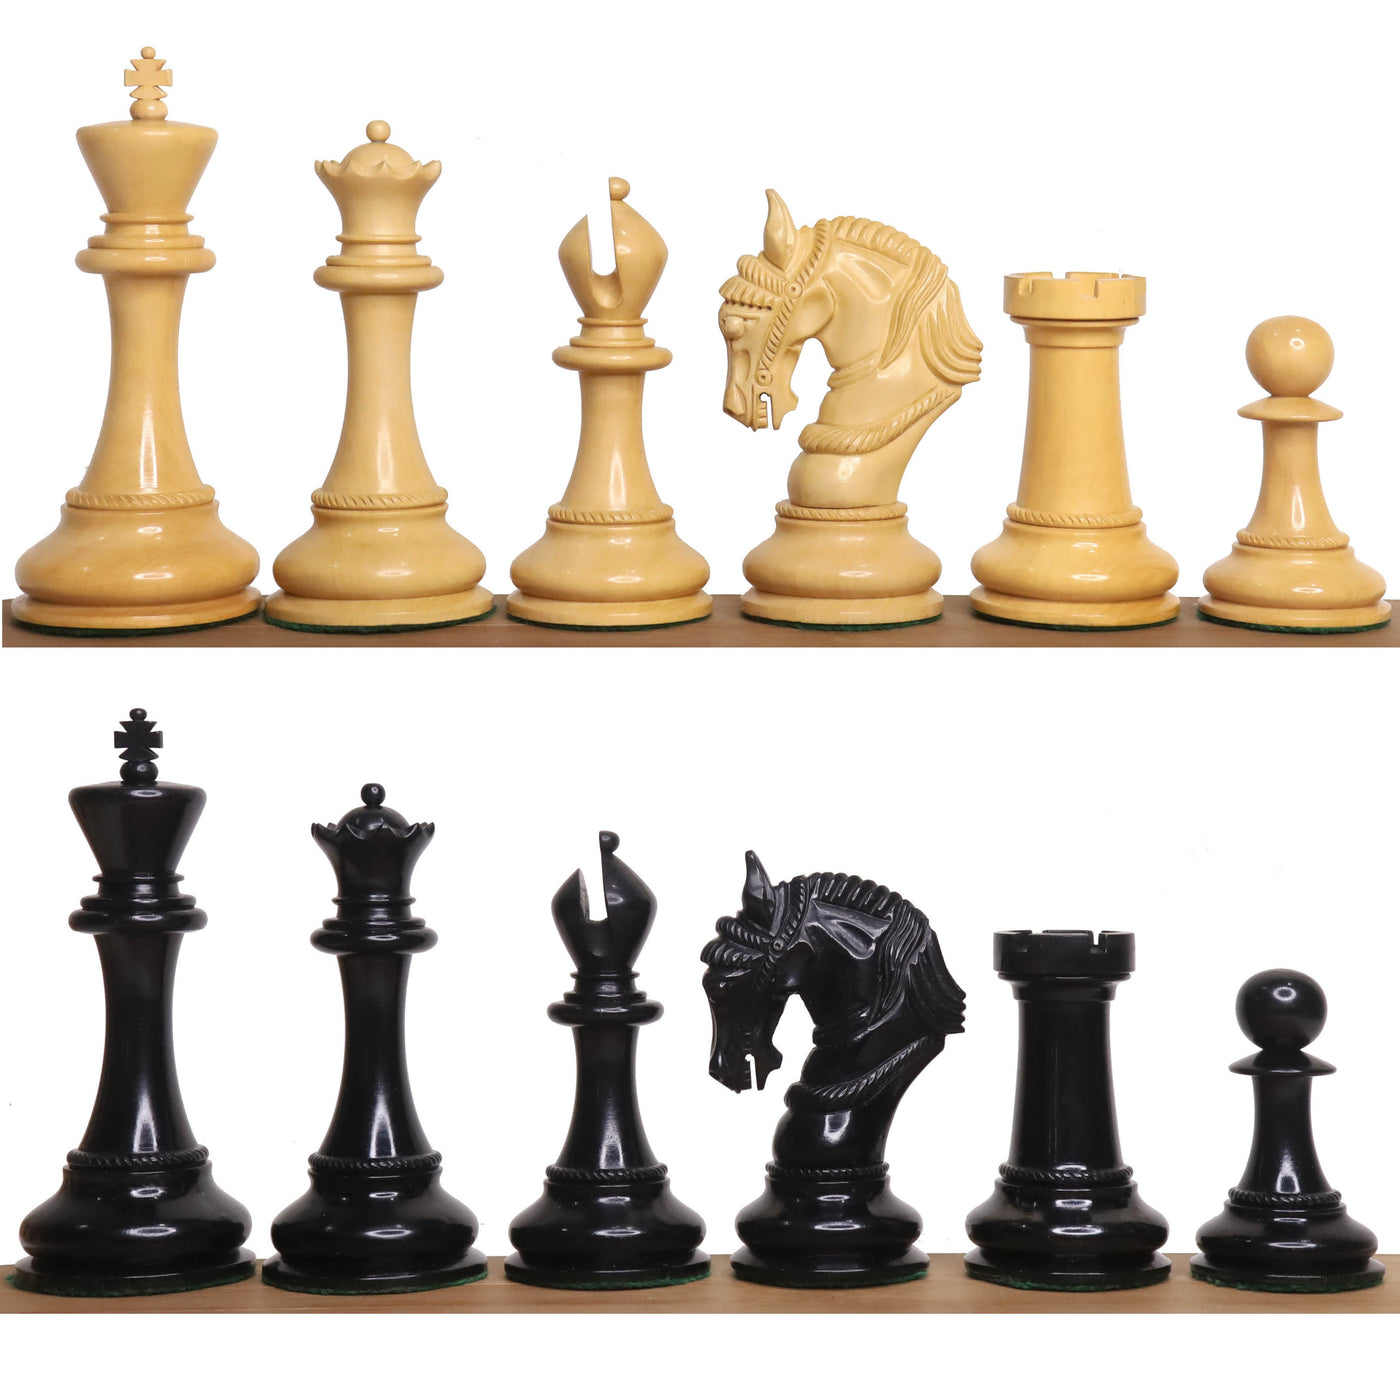 4.5" Imperator Luxury Staunton Chess Set - Chess Pieces Only - Ebony Wood -Triple Weight